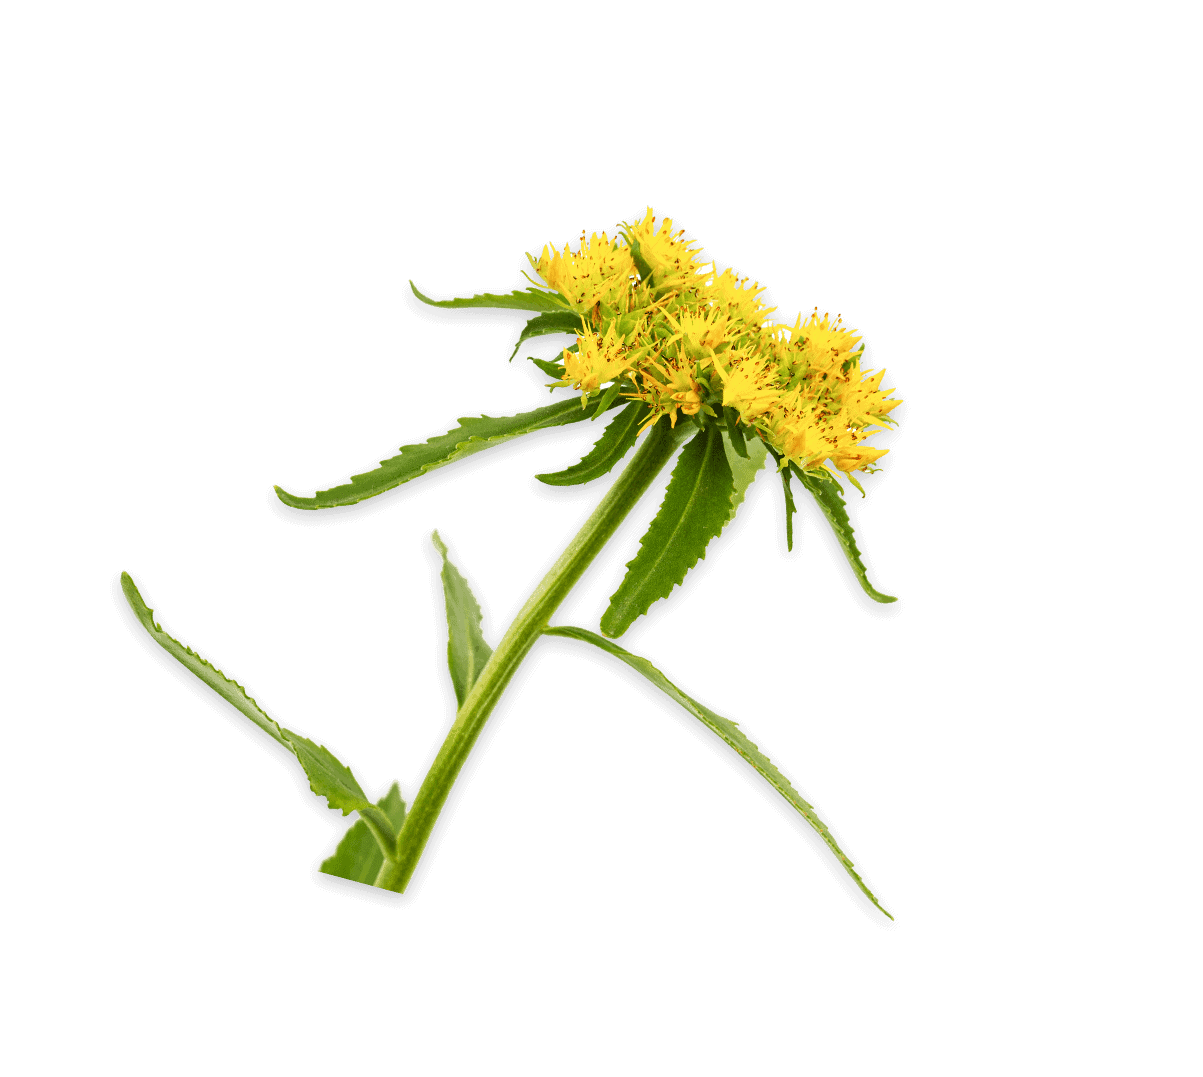 yellow flowers of rhodiola rosea isolated on whit 2022 02 03 02 59 15 utc 1